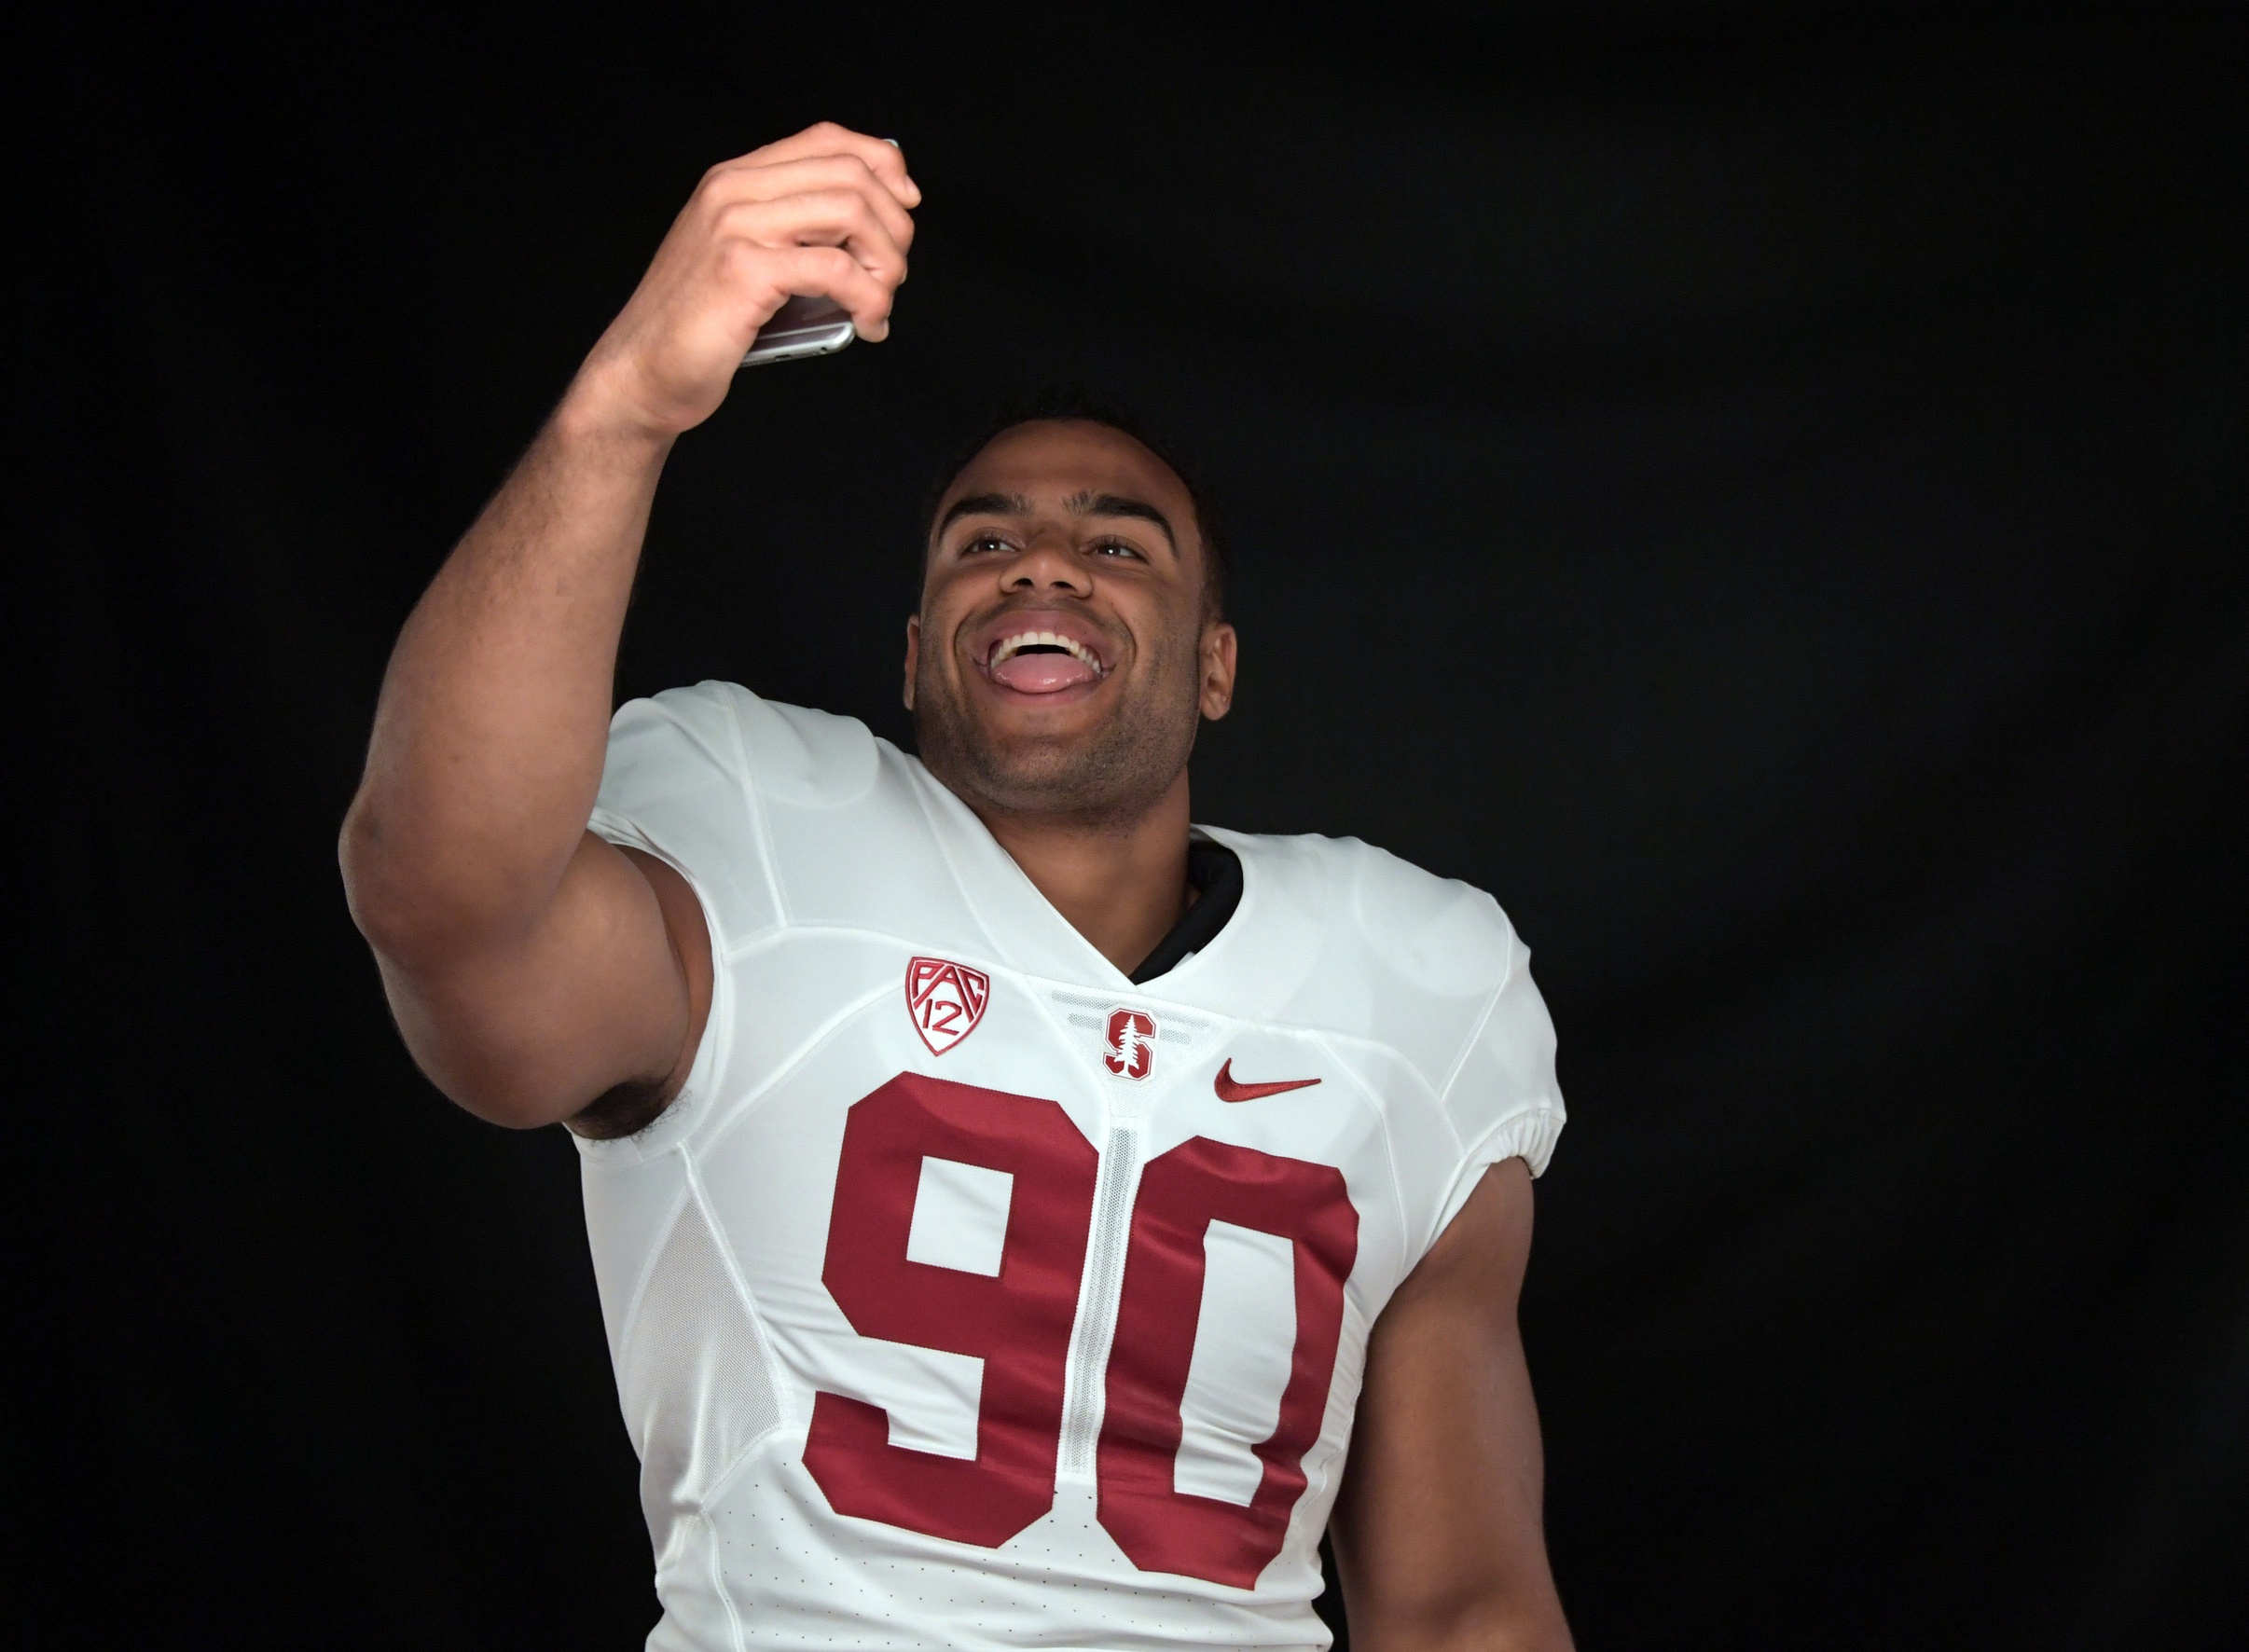 Jul 15, 2016; Hollywood, CA, USA; Stanford Cardinal defensive end Solomon Thomas takes a selfie during Pac-12 media day at Hollywood & Highland. Mandatory Credit: Kirby Lee-USA TODAY Sports